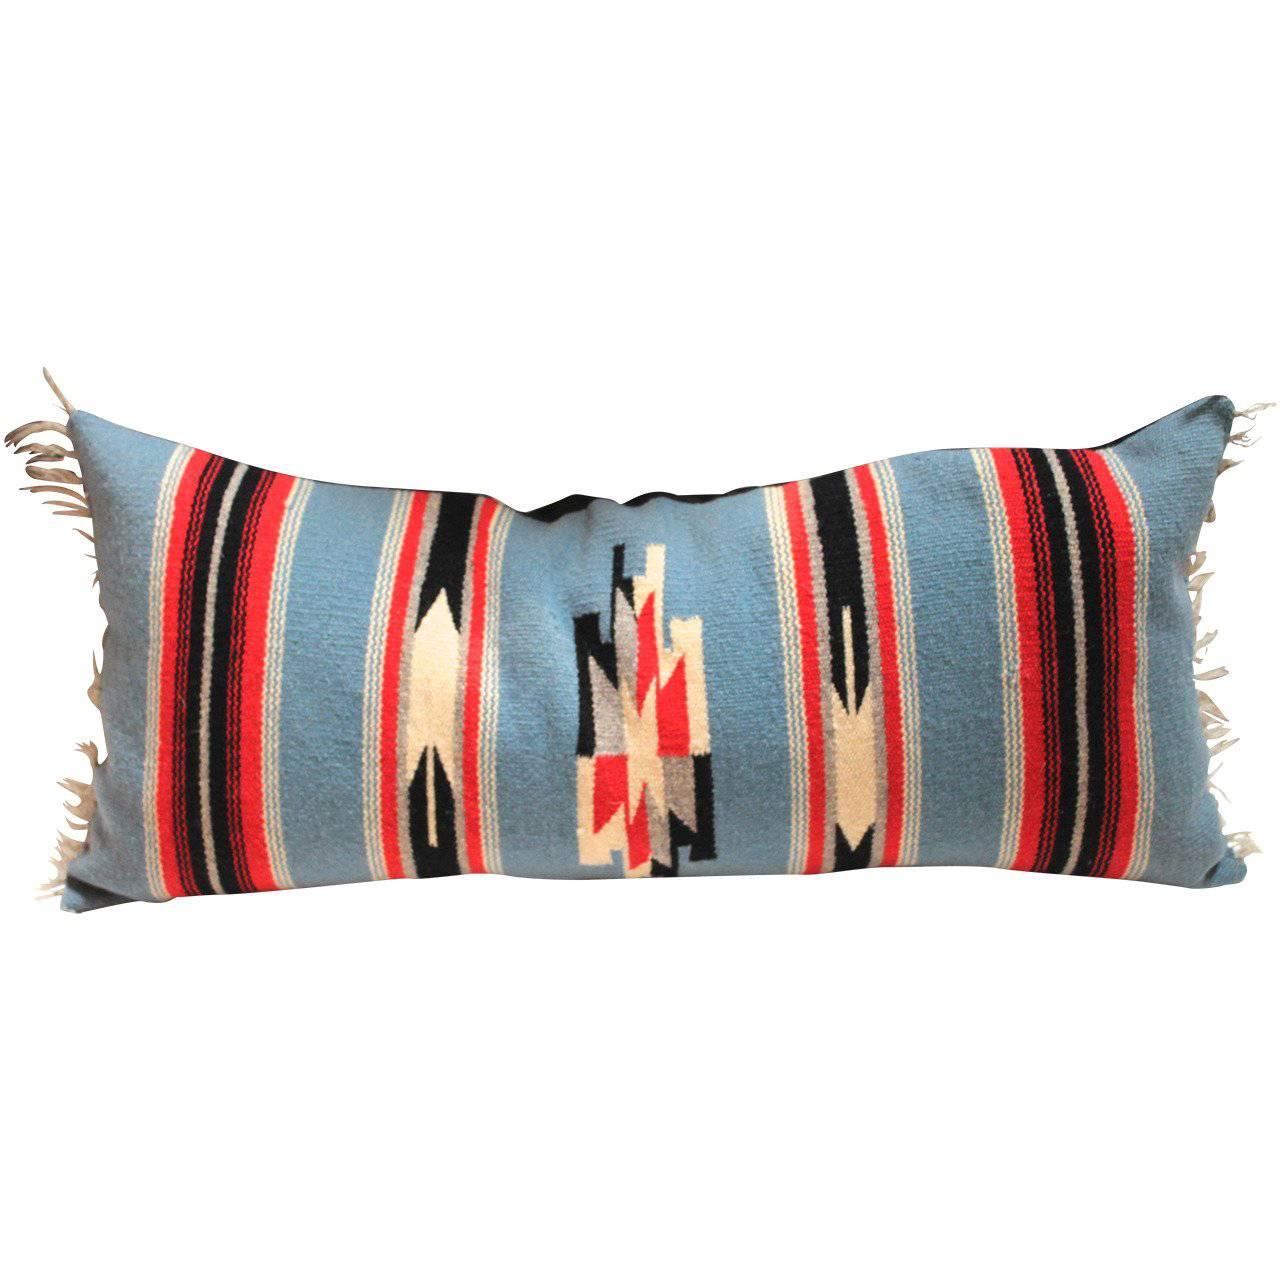 Chimayo Mexican Indian Weaving Bolster Pillows